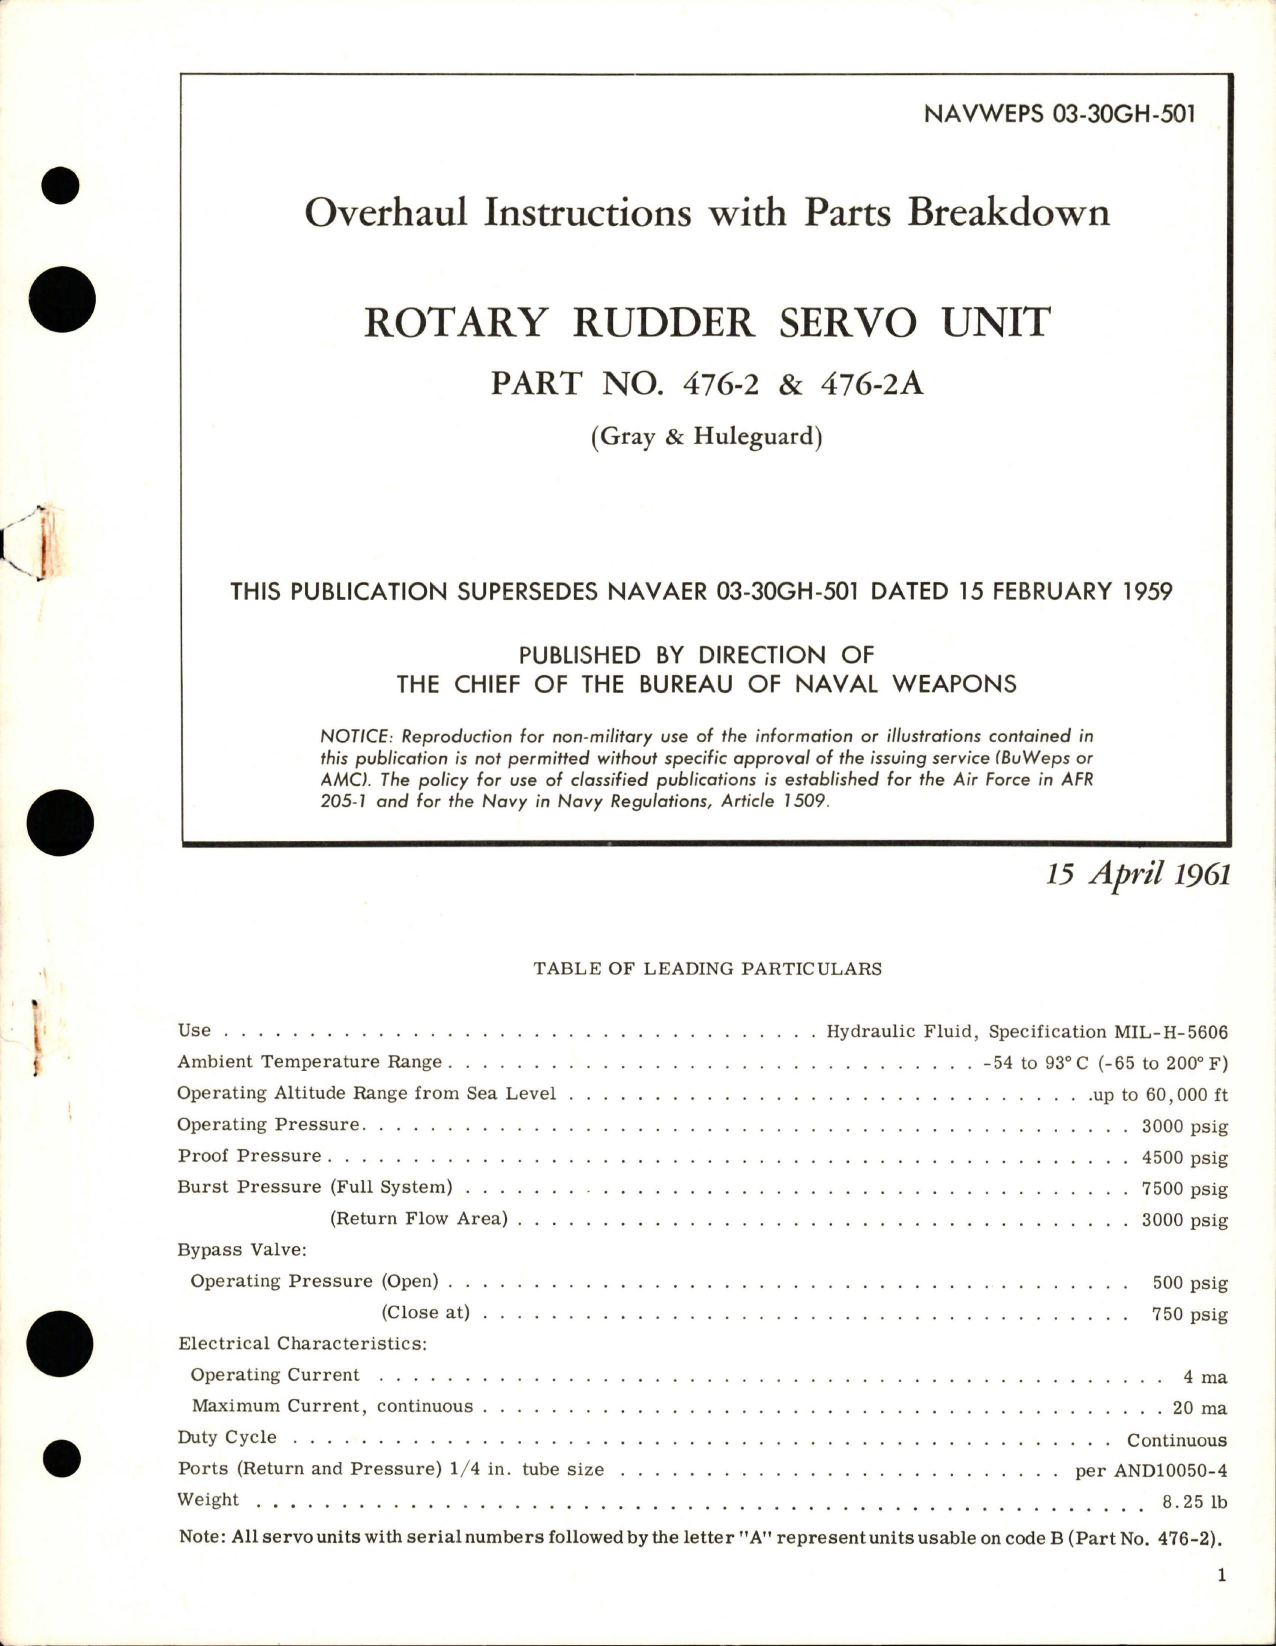 Sample page 1 from AirCorps Library document: Overhaul Instructions with Parts Breakdown for Rotary Rudder Servo Unit - Part 476-2 and 476-2A